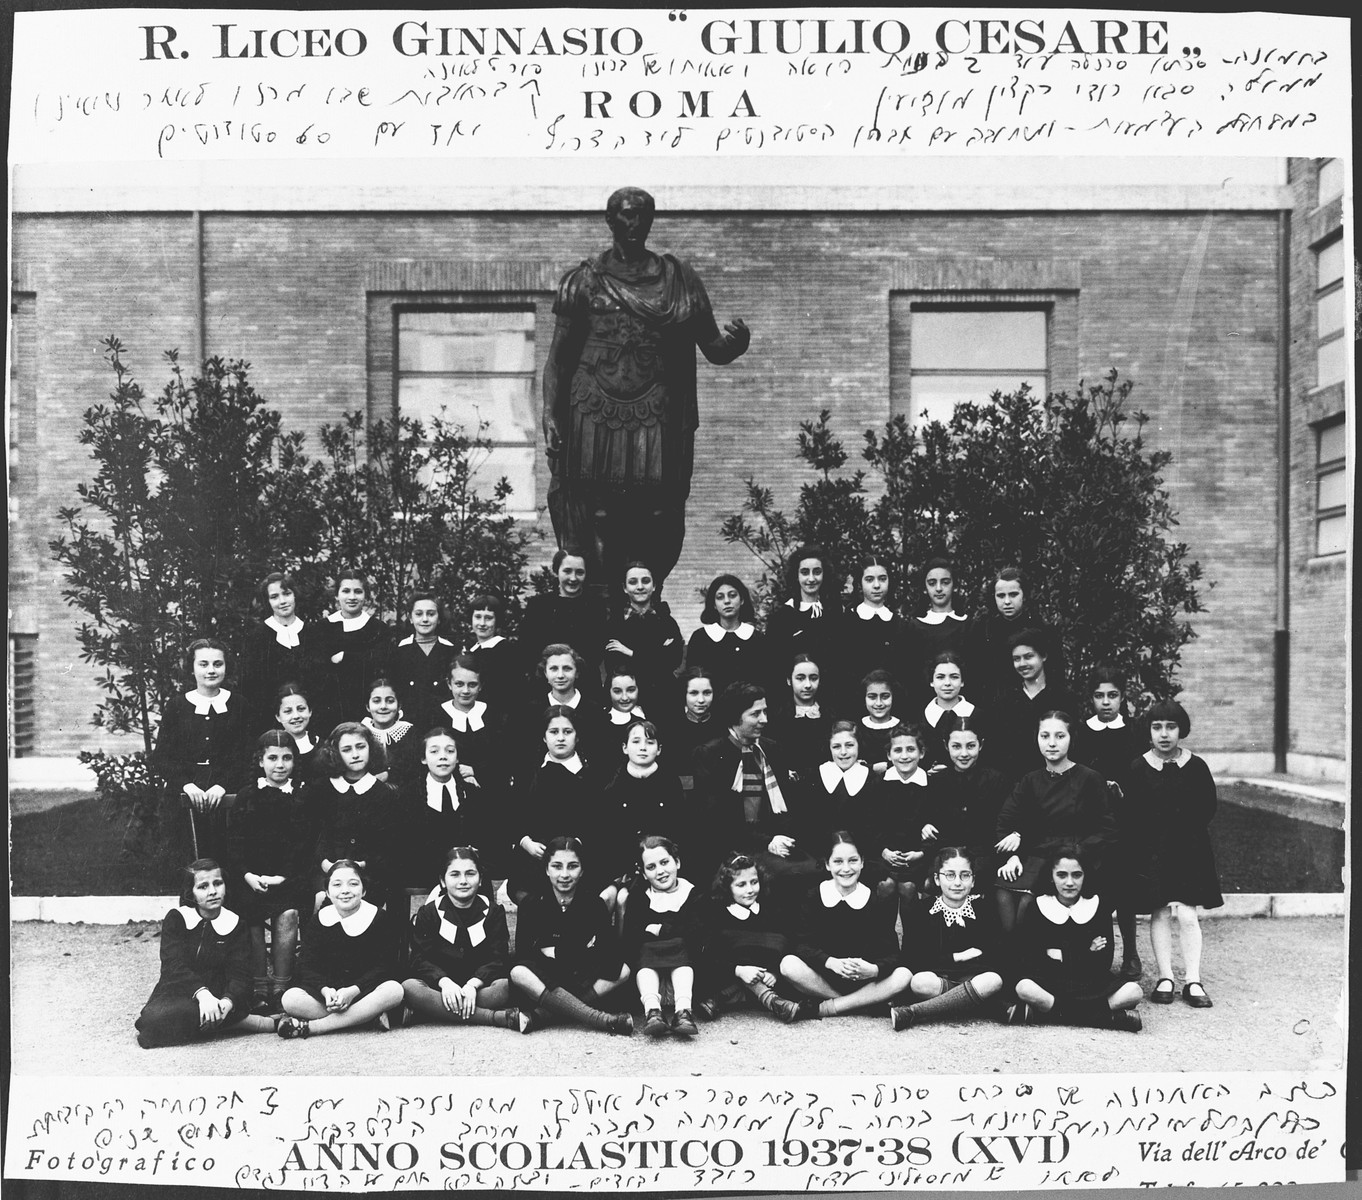 Students in the Giulio Cesare junior high school in Rome.  

Those pictured include four Jewish students, Serenella Foa, Graziella Portaleone and two others.  This was the last year they could attend the school before the racial laws were imposed.  

After Serenella realized she could not return to school, her teacher wrote to her expressing her sorrow at losing such fine students and the reasons for their expulsion.